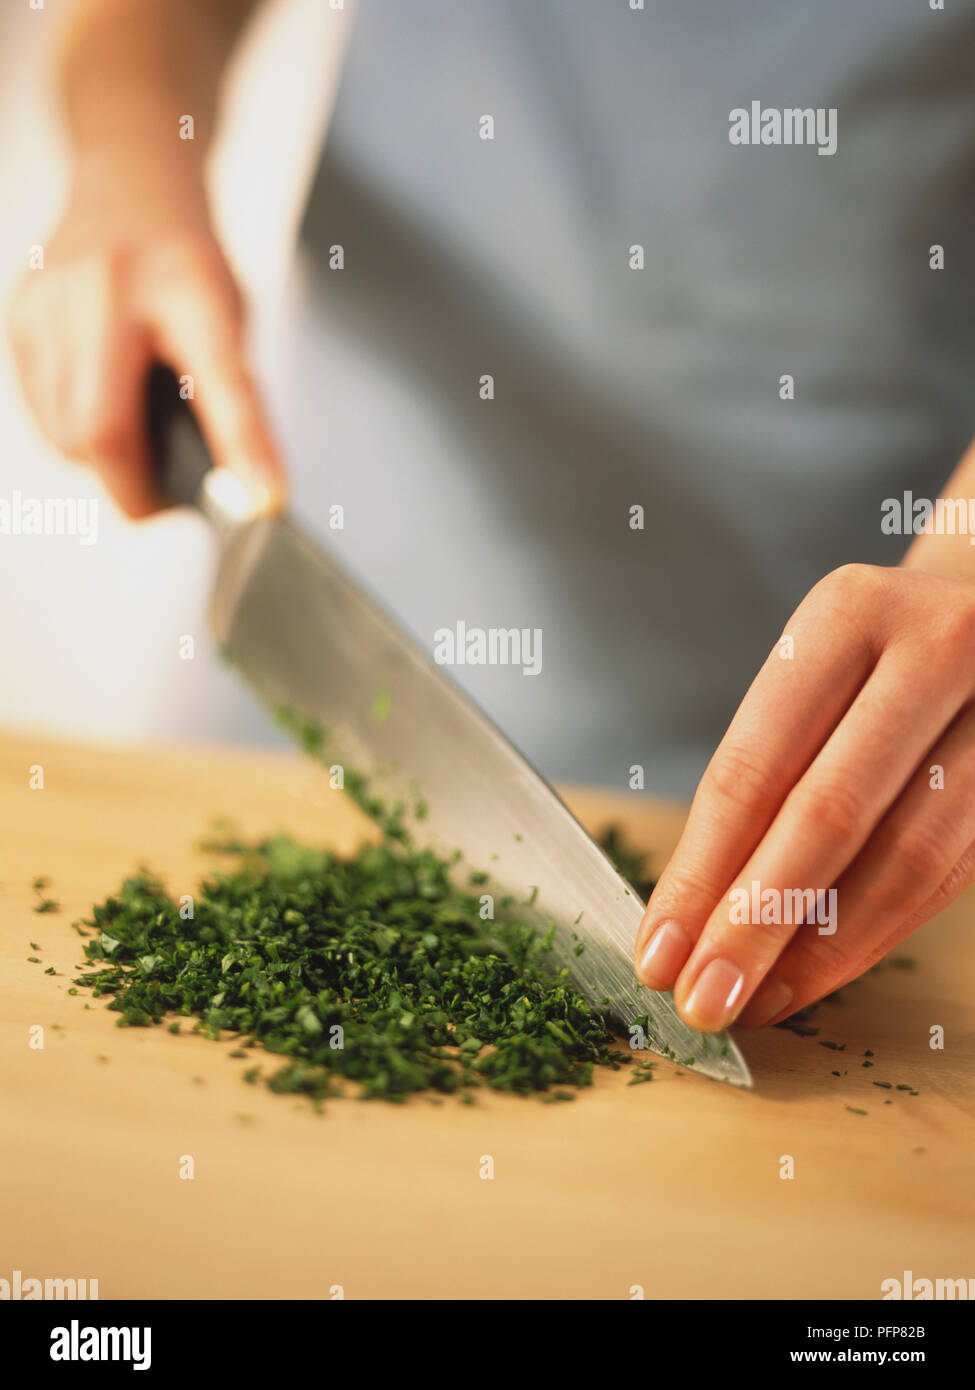 Petroselinum crispum, parsley, using large, sharp knife to cut parsley leaves, holding point of blade with flat fingers of non-cutting hand, chopping up and down in rocking motion on wooden work surface until herbs are finely cut. Stock Photo